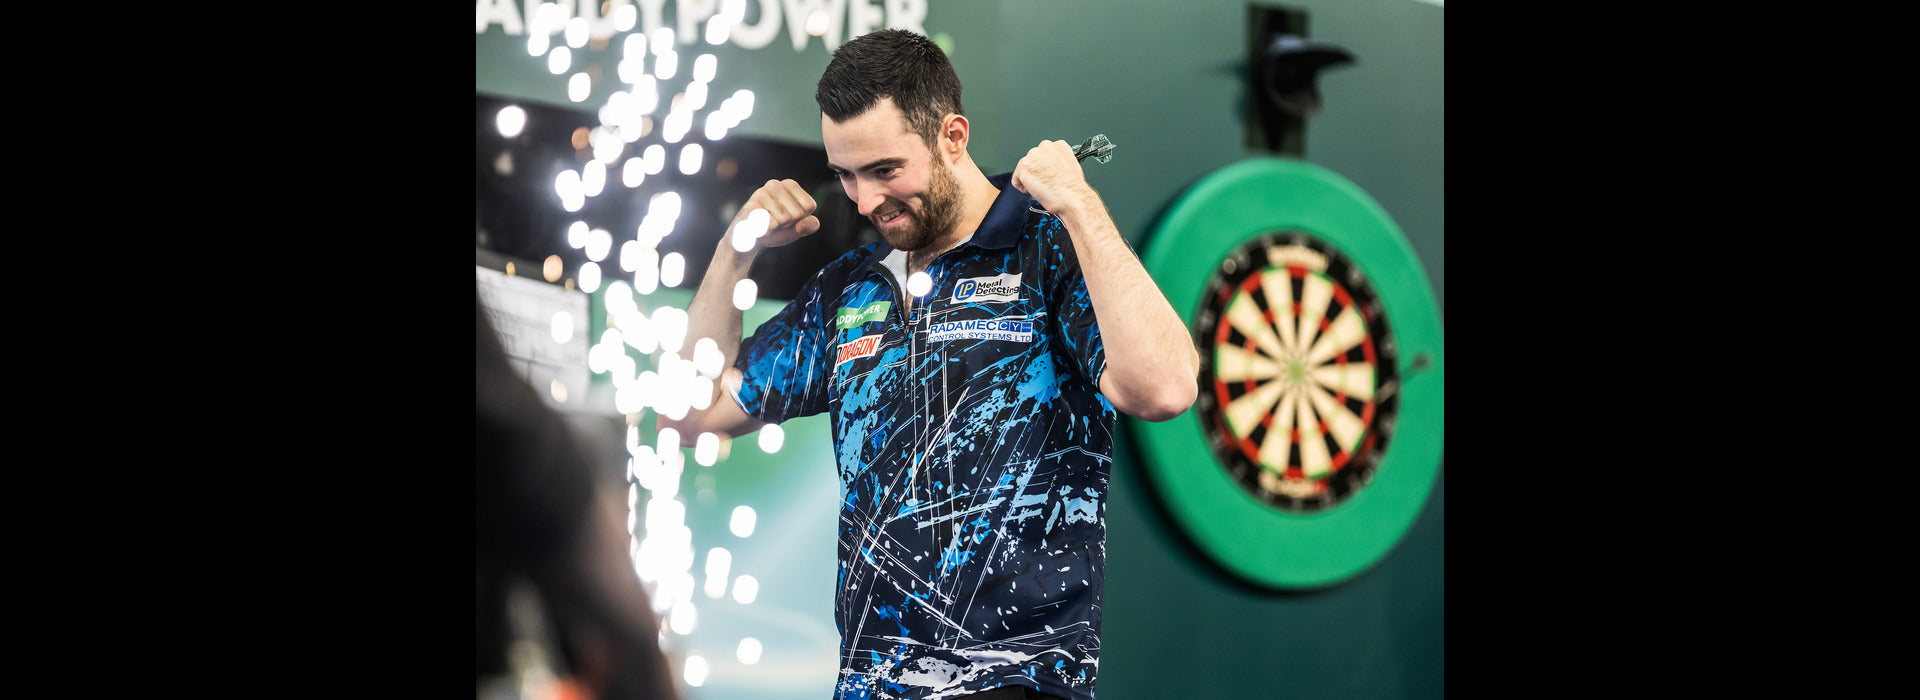 Humphries set up mouth-watering World Championship final